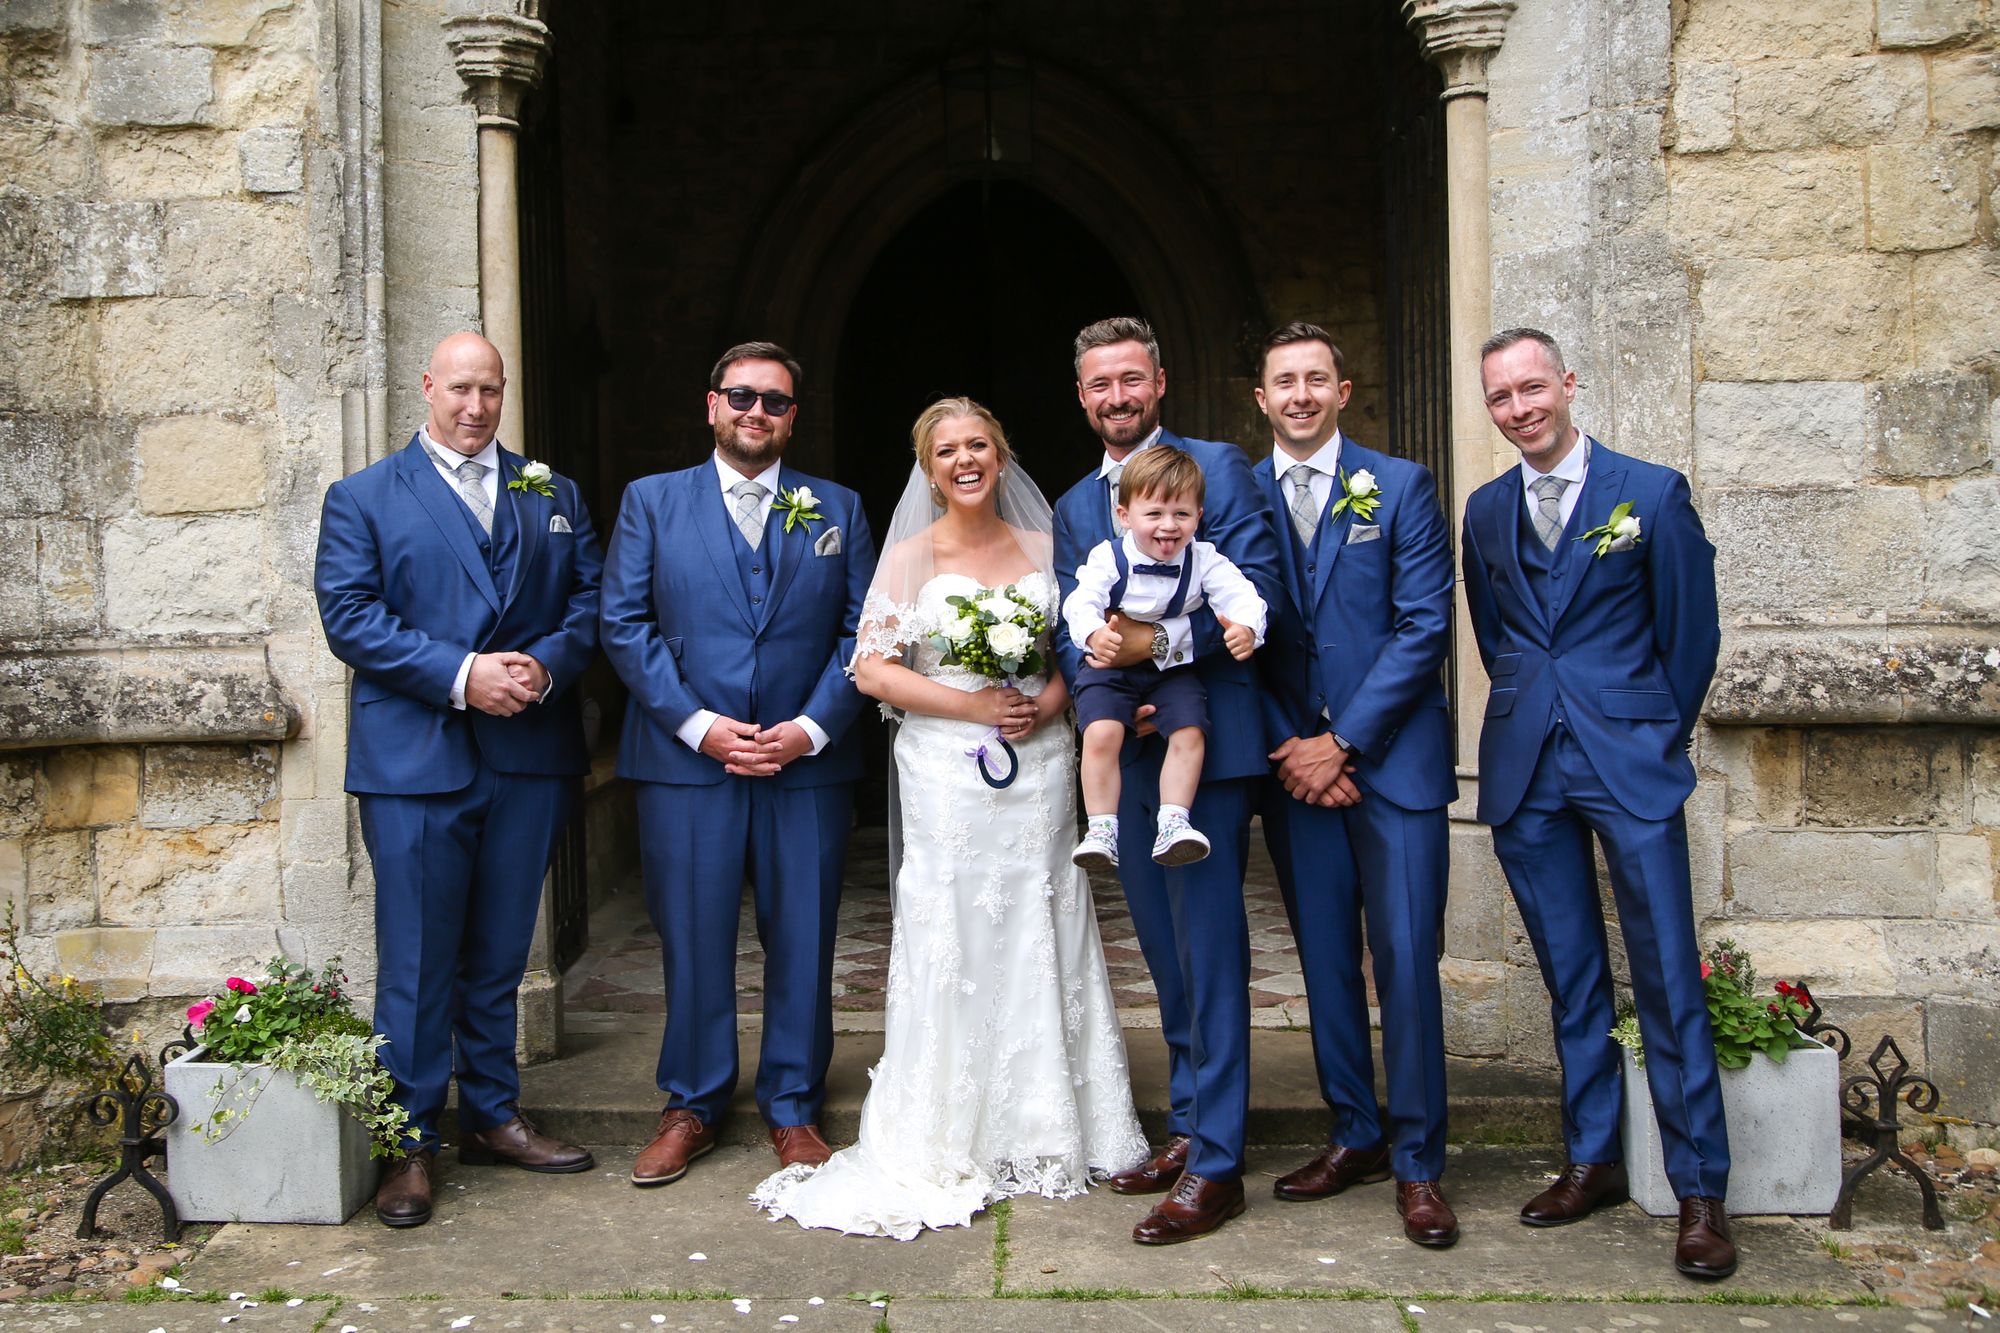 Photo of bride and groomsmen with page boy portrait outside wedding church by Tanya Aldcroft Photography